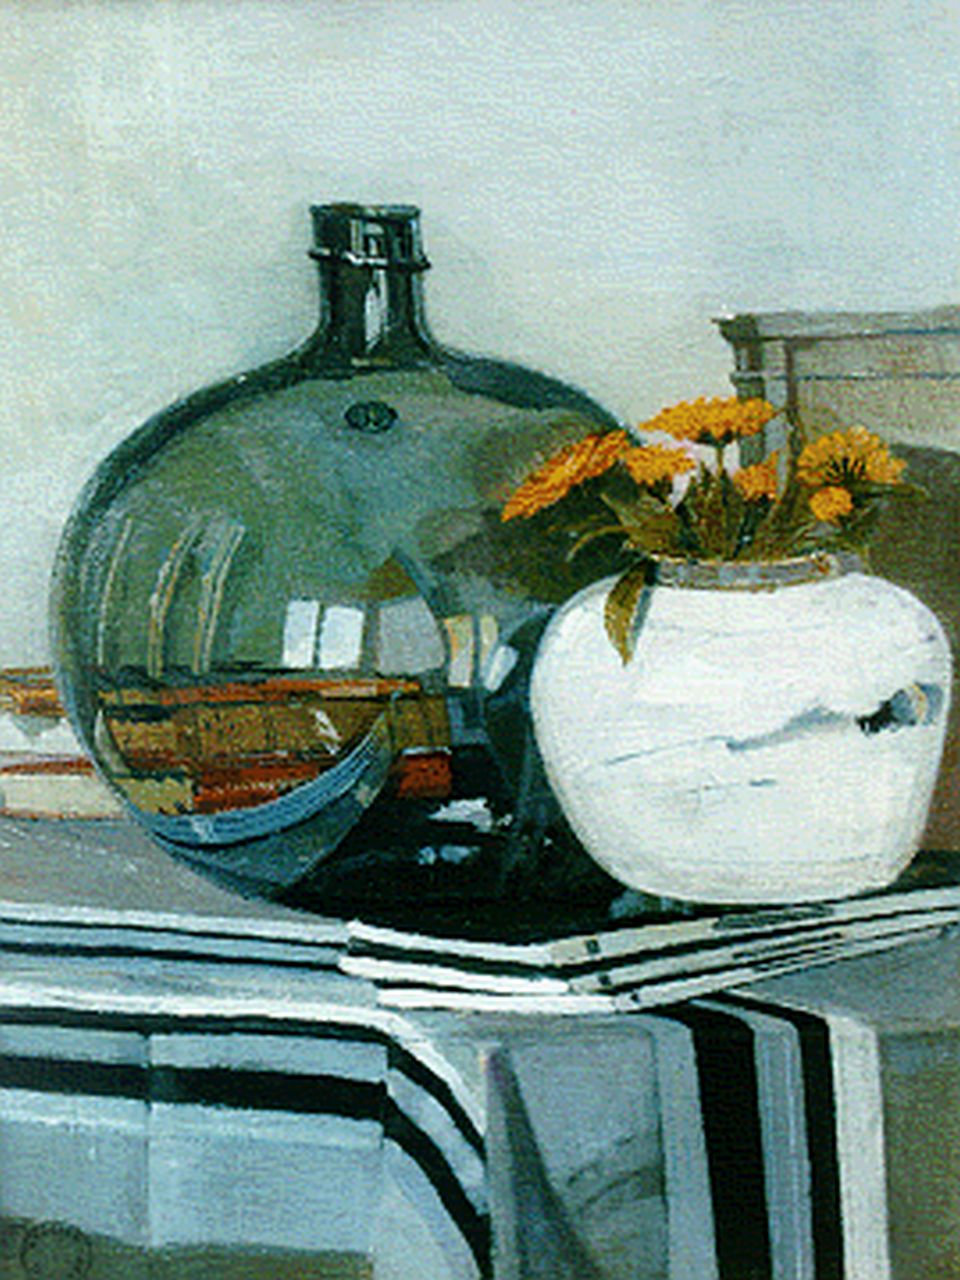 Ket D.H.  | Dirk Hendrik 'Dick' Ket, A still life with books and flowers in a ginger jar, Öl auf Leinwand 36,5 x 28,0 cm, signed l.l. und painted between 1925-1926